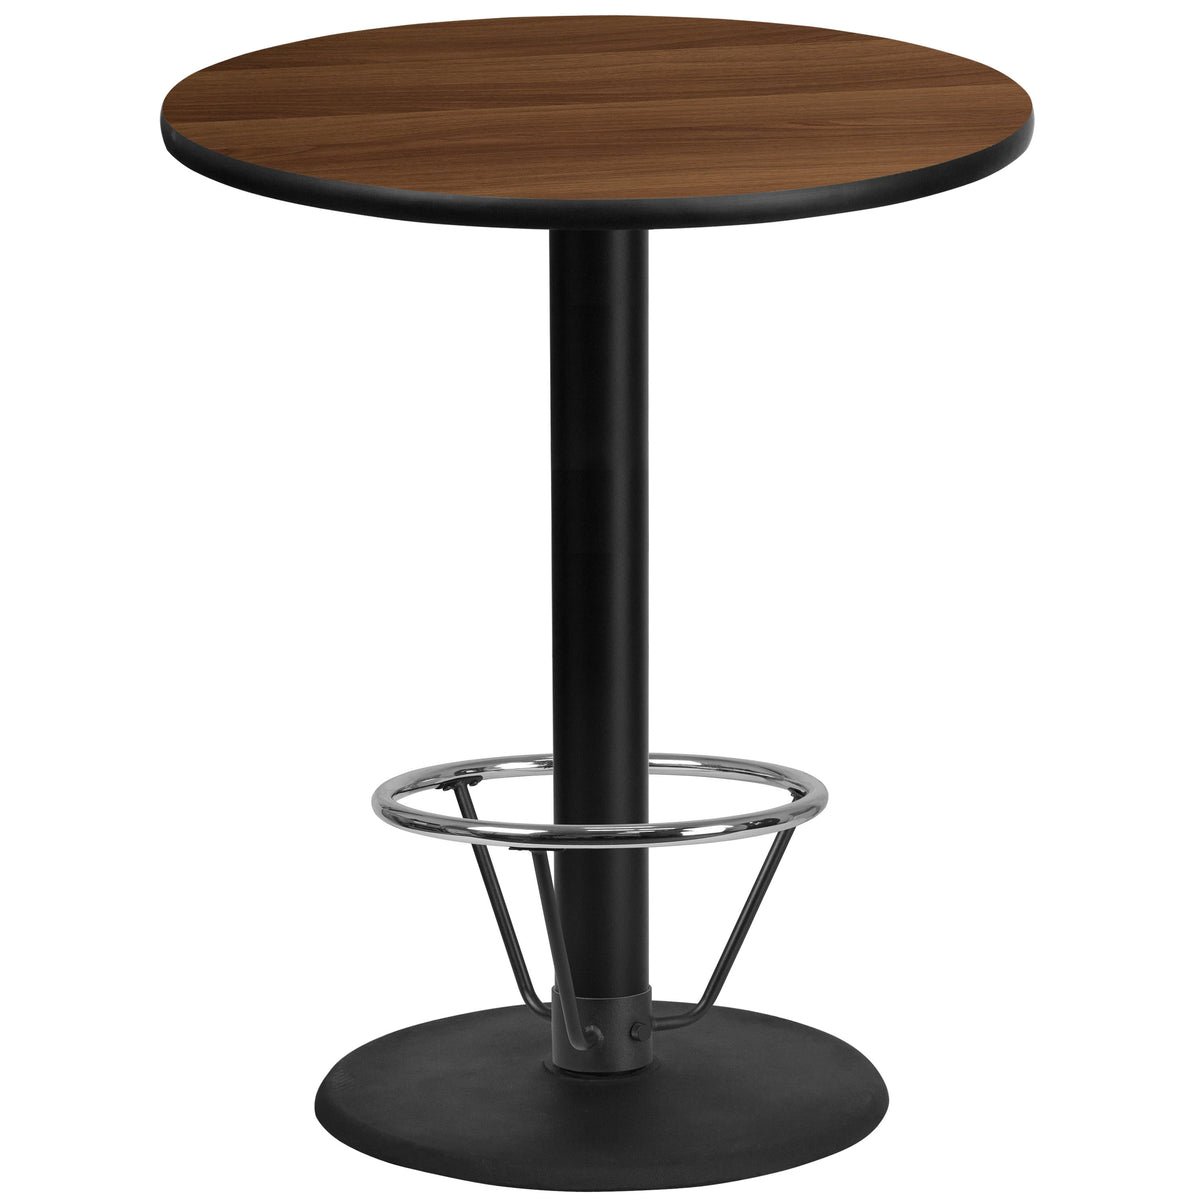 Walnut |#| 36inch Round Walnut Laminate Table Top & 24inch Round Bar Height Base with Foot Ring